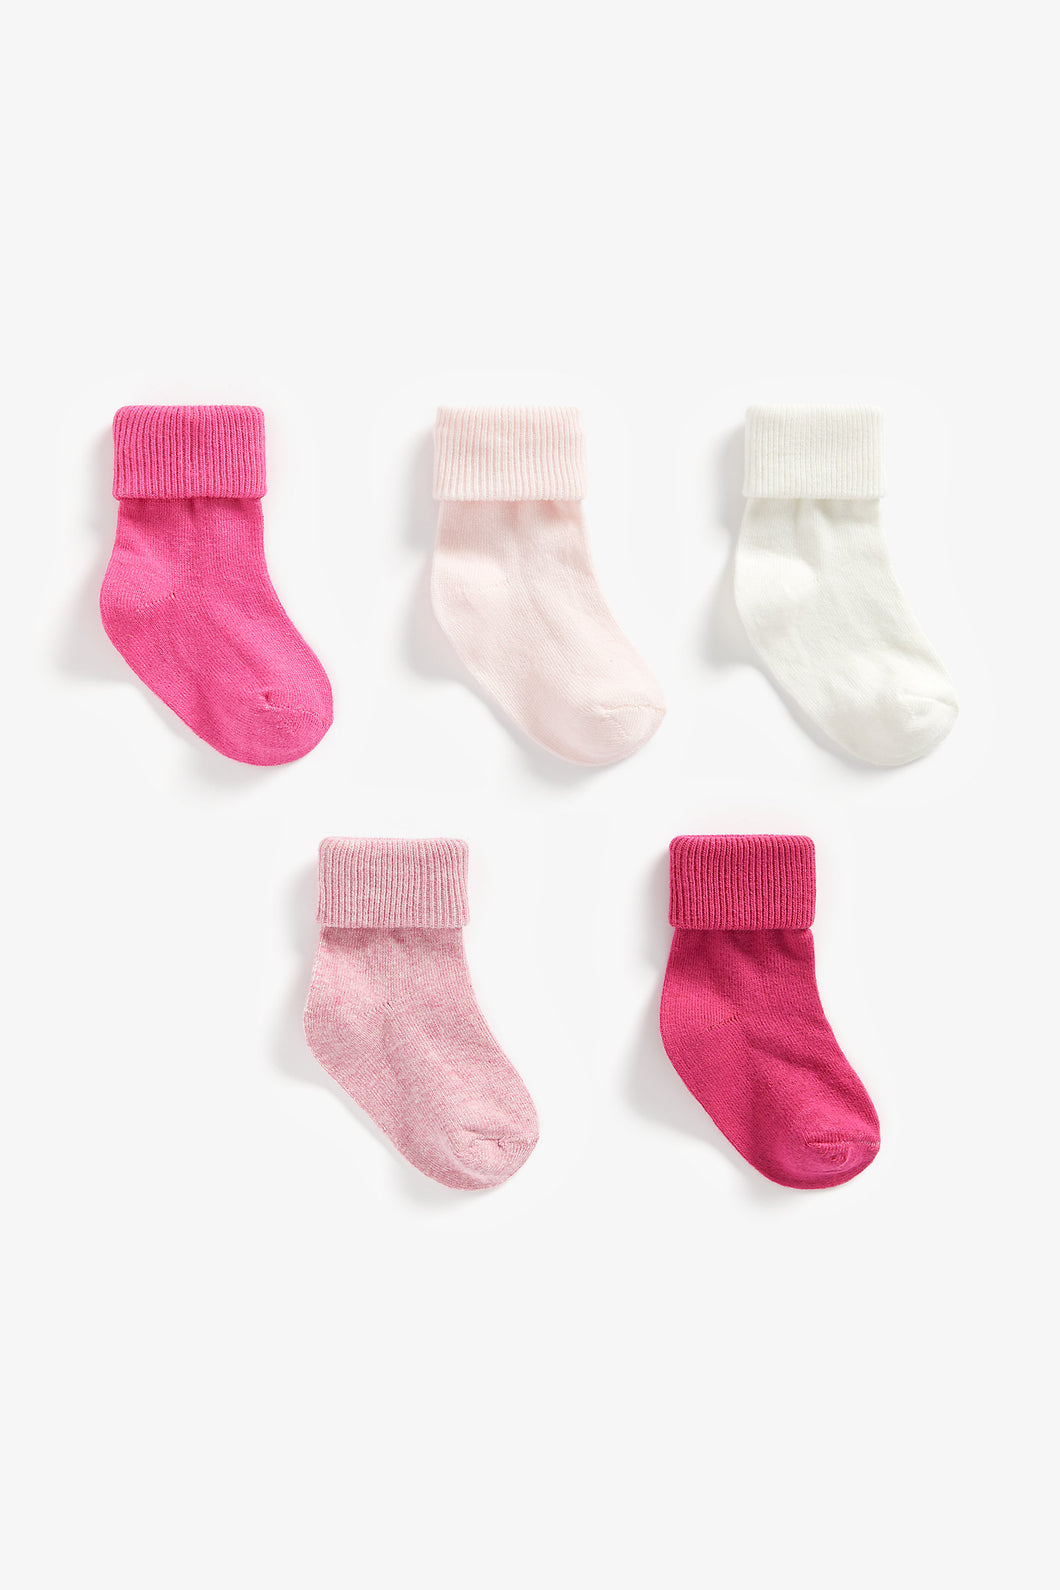 Mothercare Pink Turn-Over-Top Baby Socks - 5 Pack